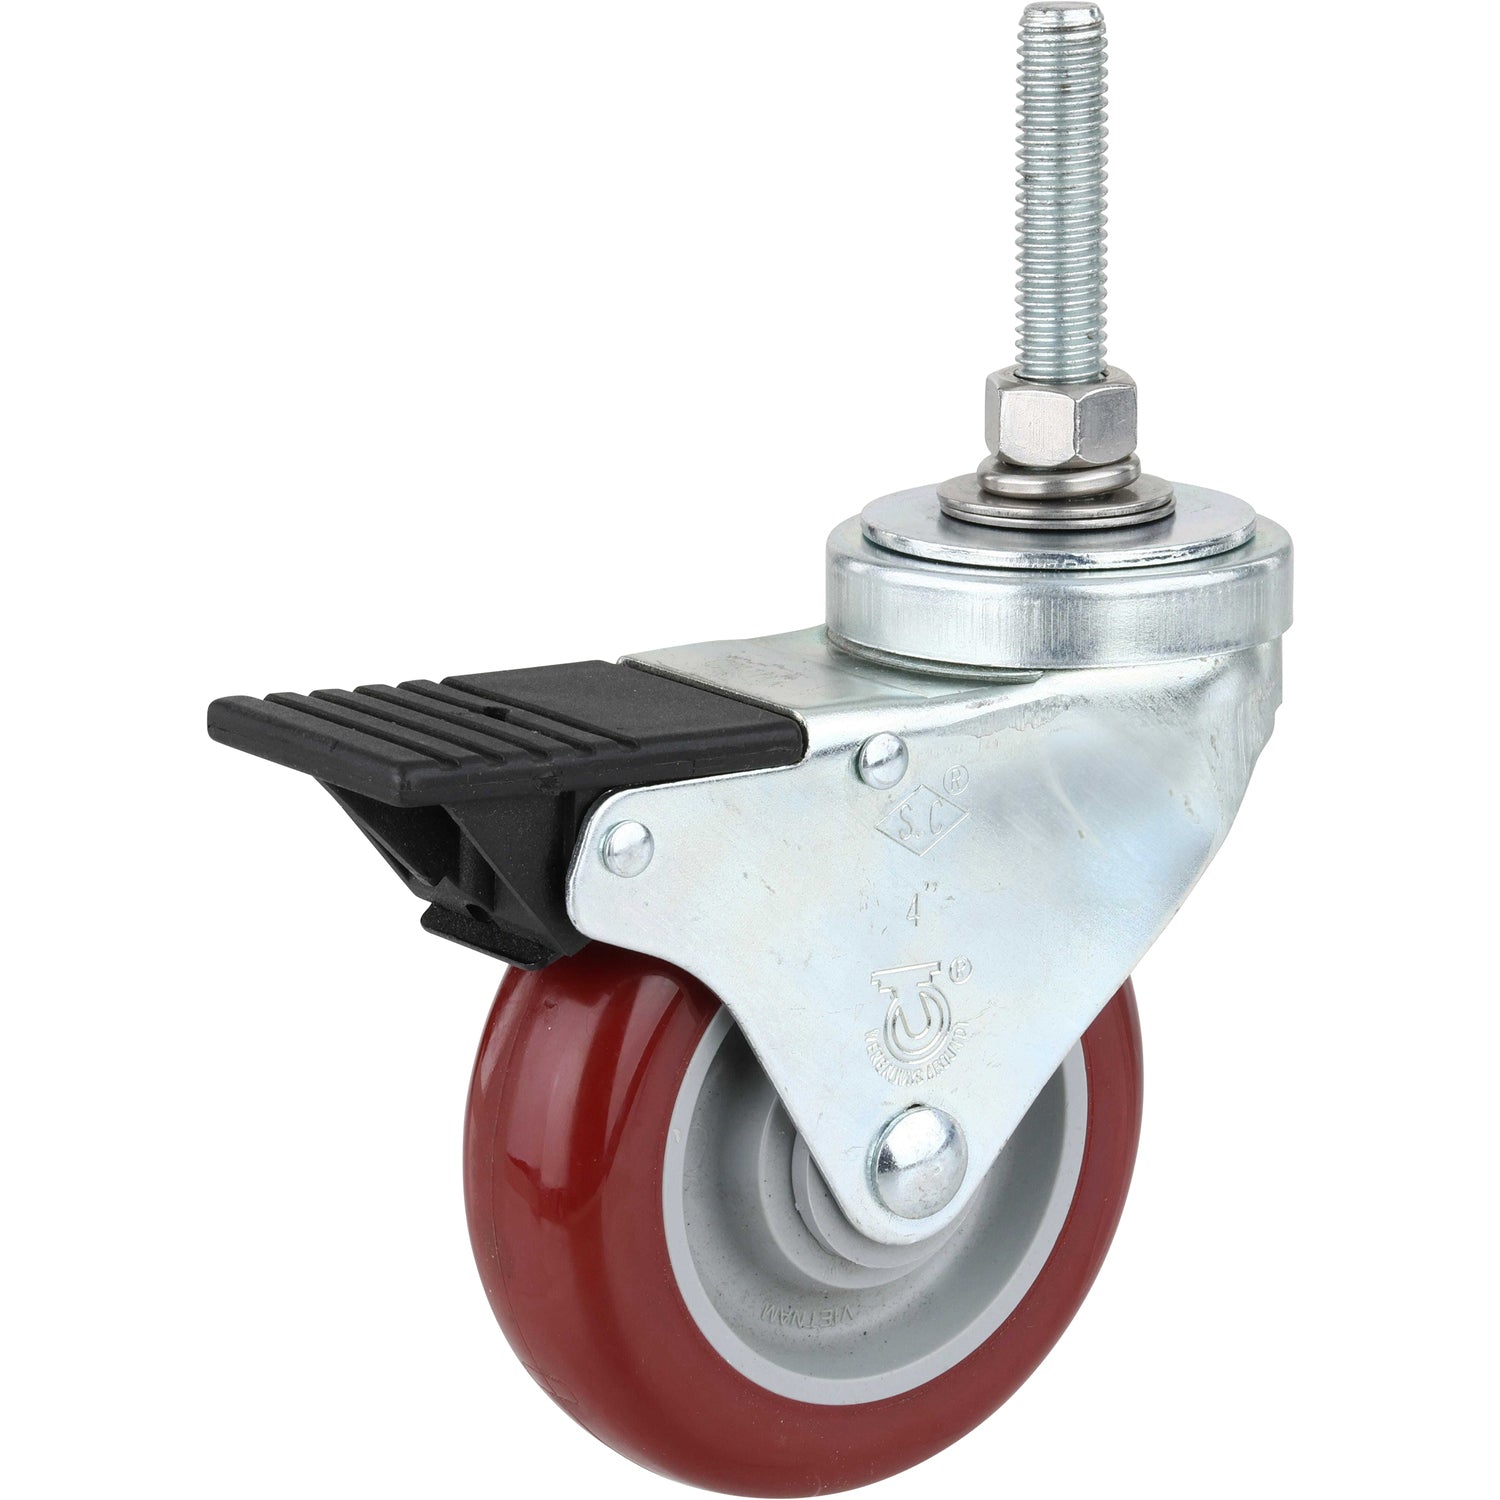 Zinc plated and red rubber caster with black break and threaded stem on white background.